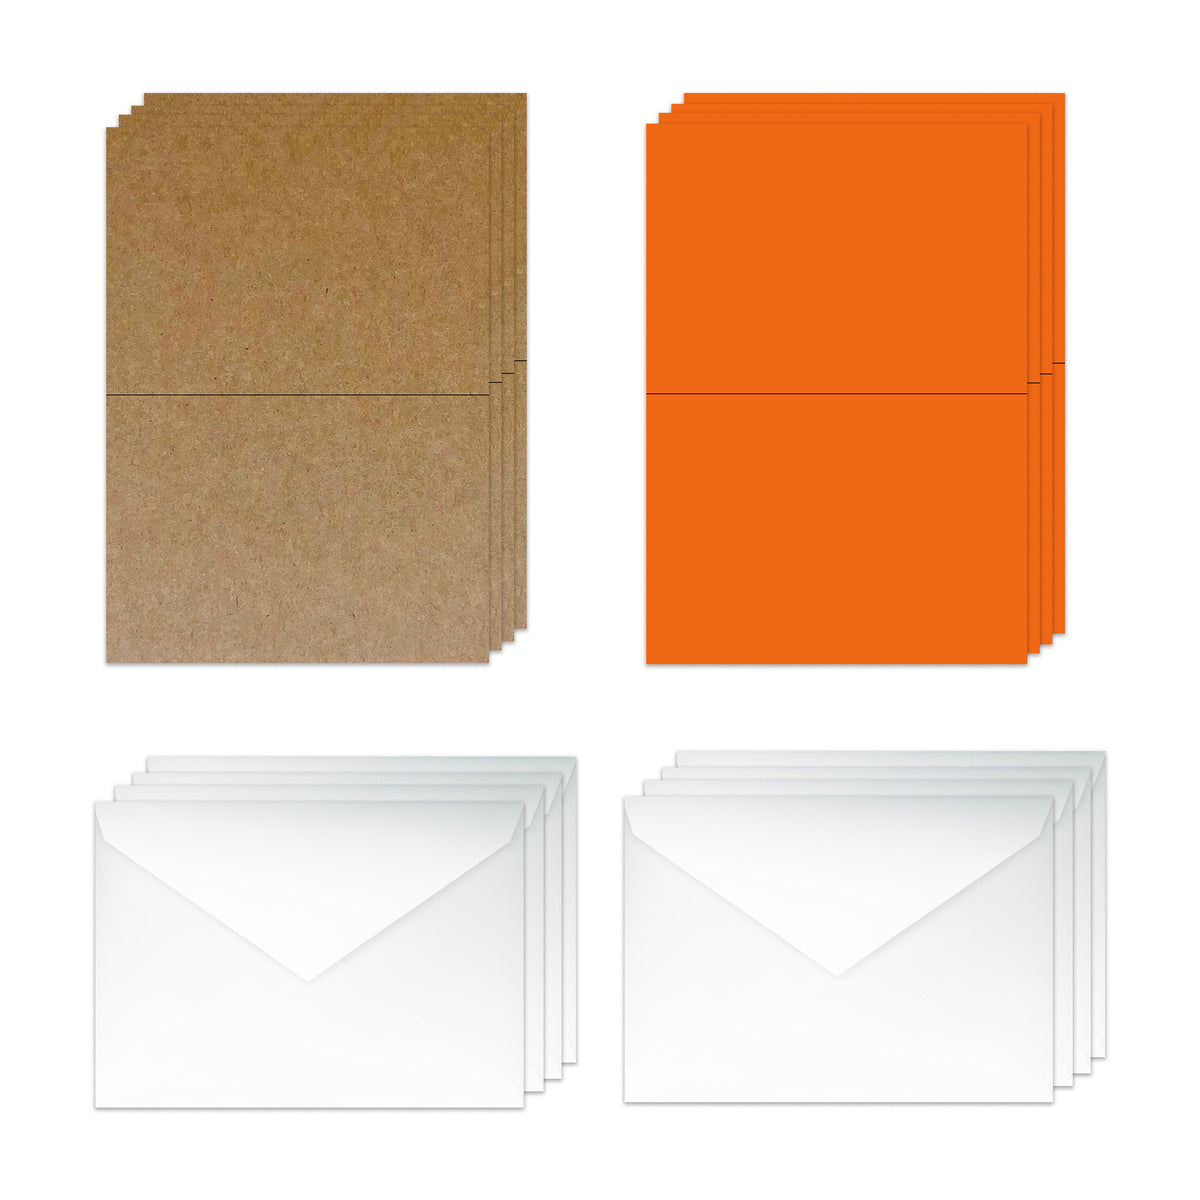 Blank 5x7 Folded Discount Card Stock and Envelopes  - Orange and Twine